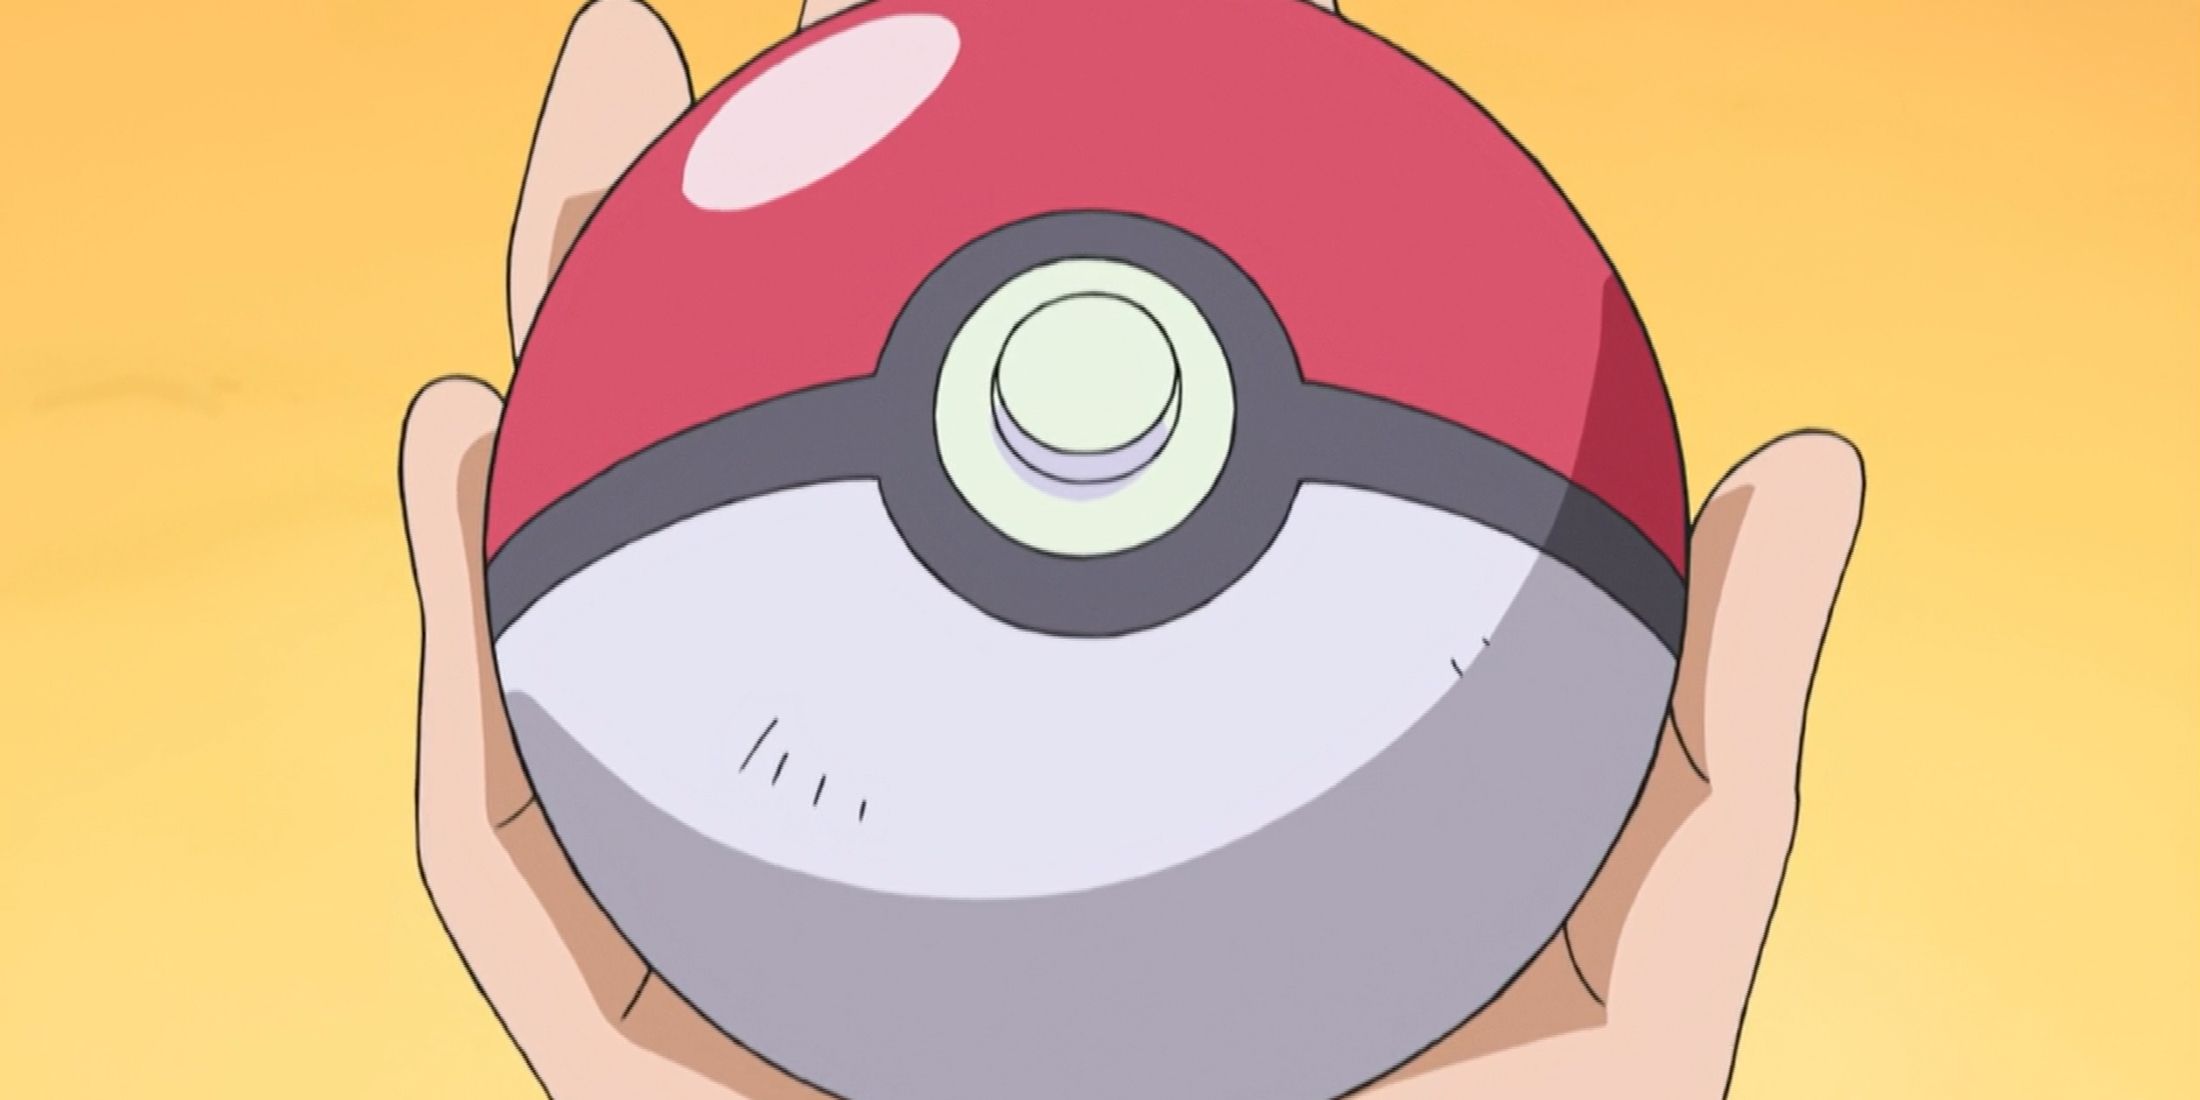 A screenshot of a hand holding a Poke Ball in the Pokemon anime.